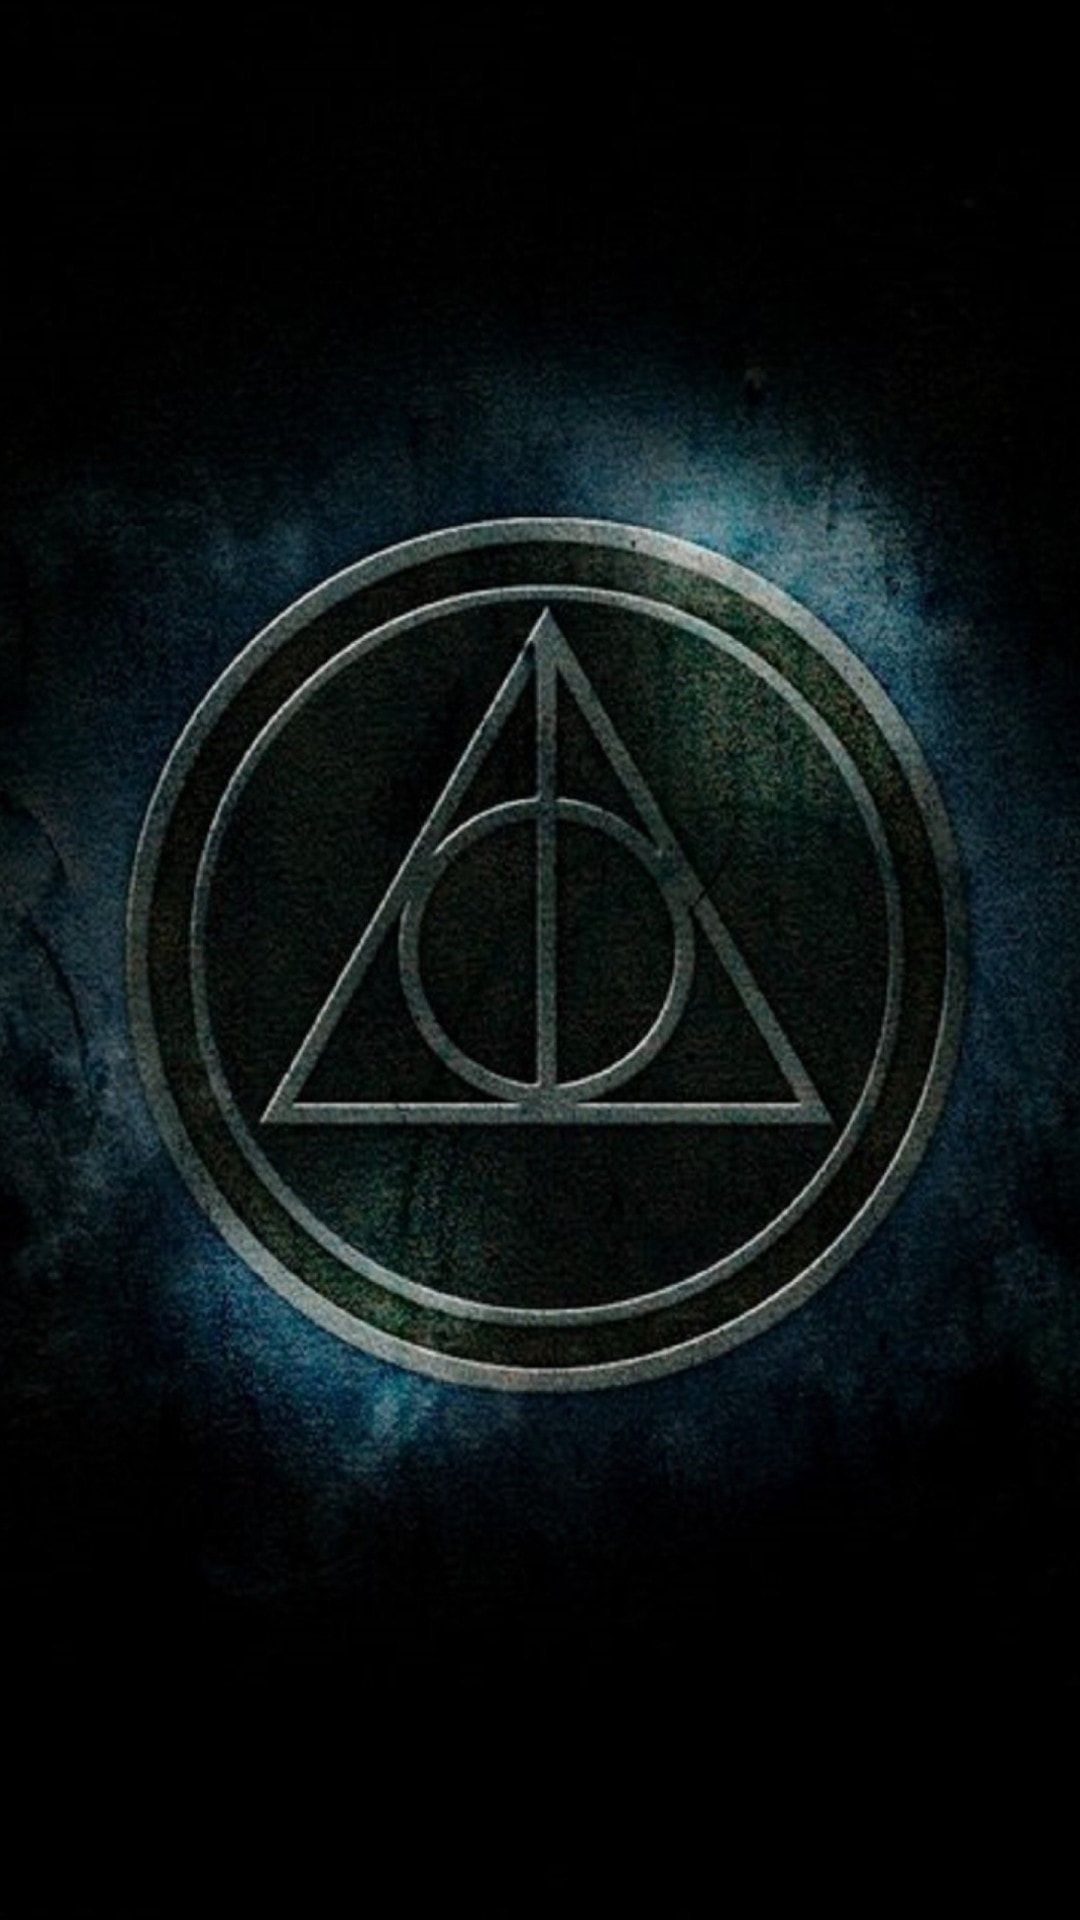 Cute Harry Potter Wallpaper Android Download. Harry potter iphone wallpaper, Harry potter wallpaper, Cute harry potter